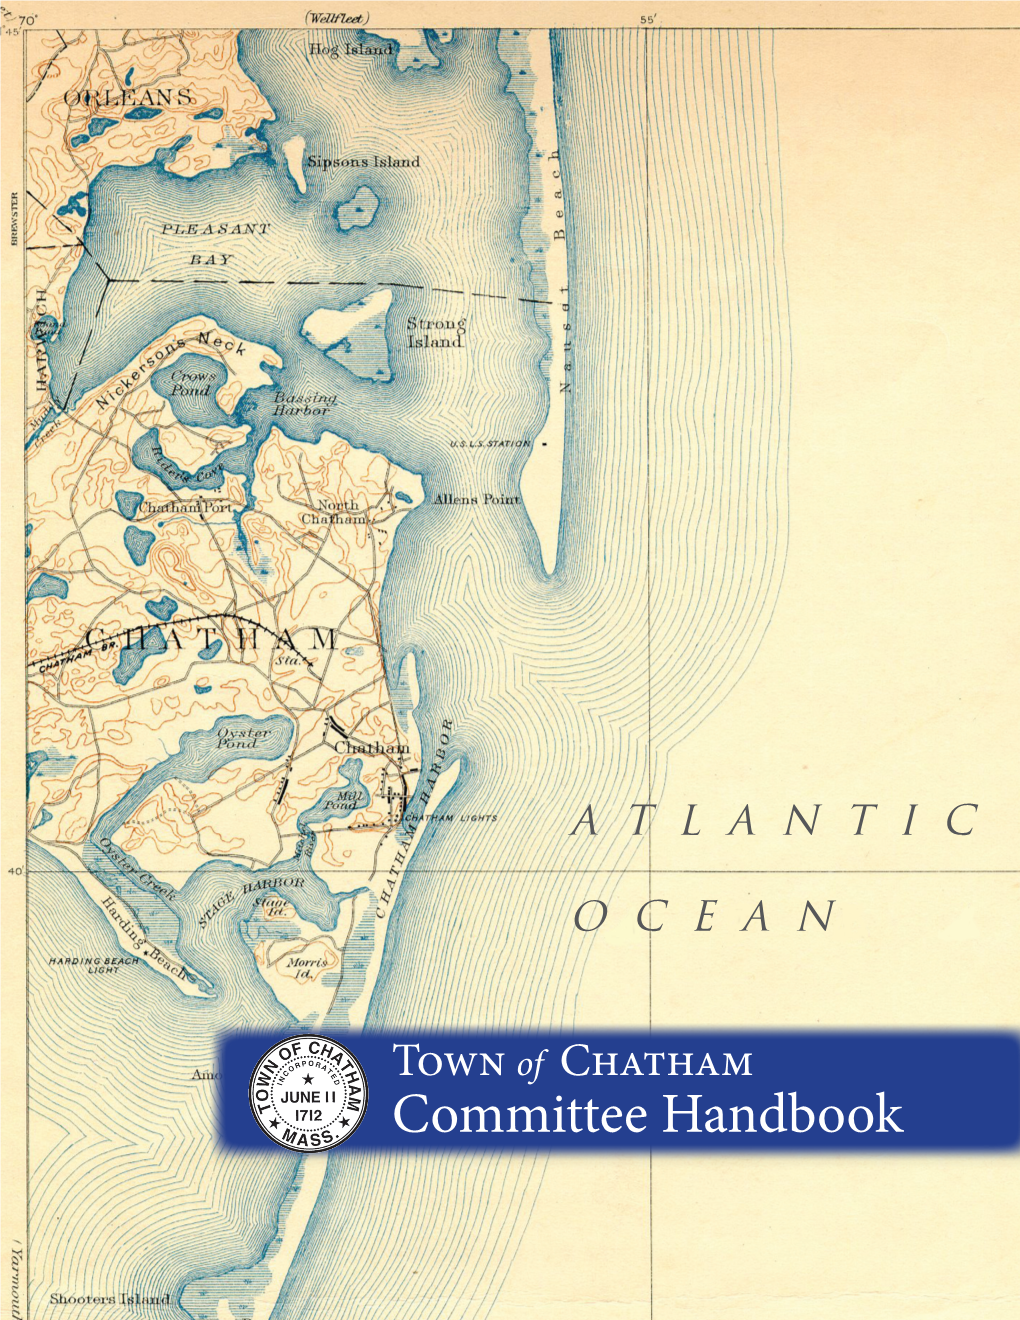 Town of Chatham Committee Handbook Town of Chatham ———————————— Committee Handbook ——————————— Table of Contents